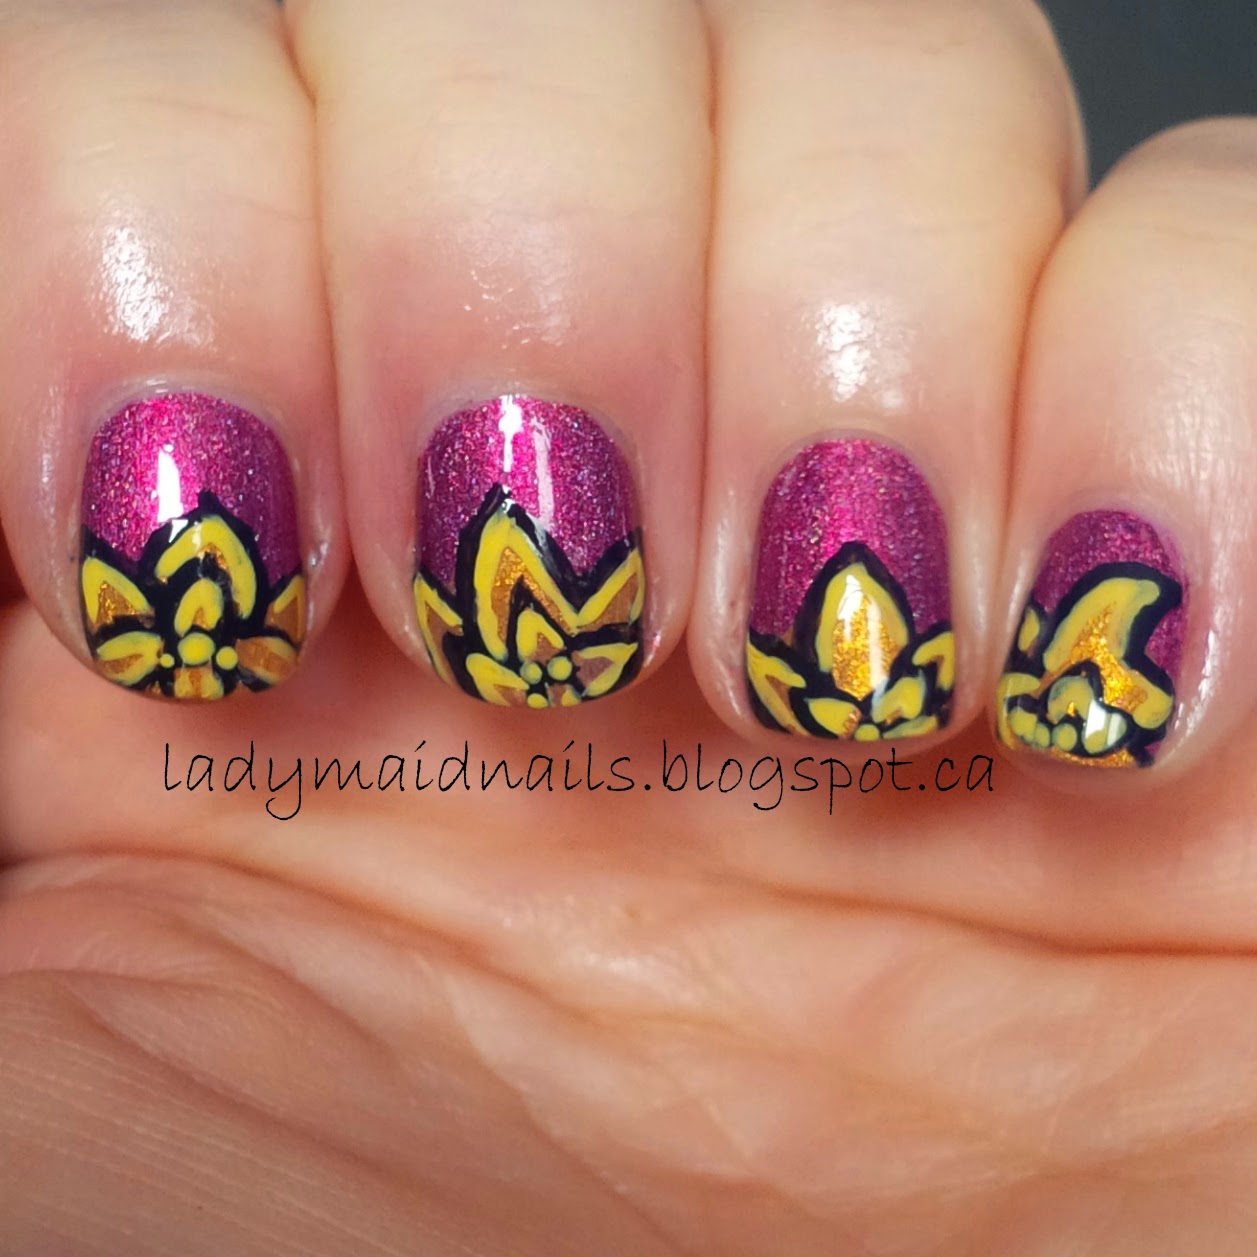 Lady Maid Nails: Copycat Look of the week, Lotus Flowers by @Bwlblogger